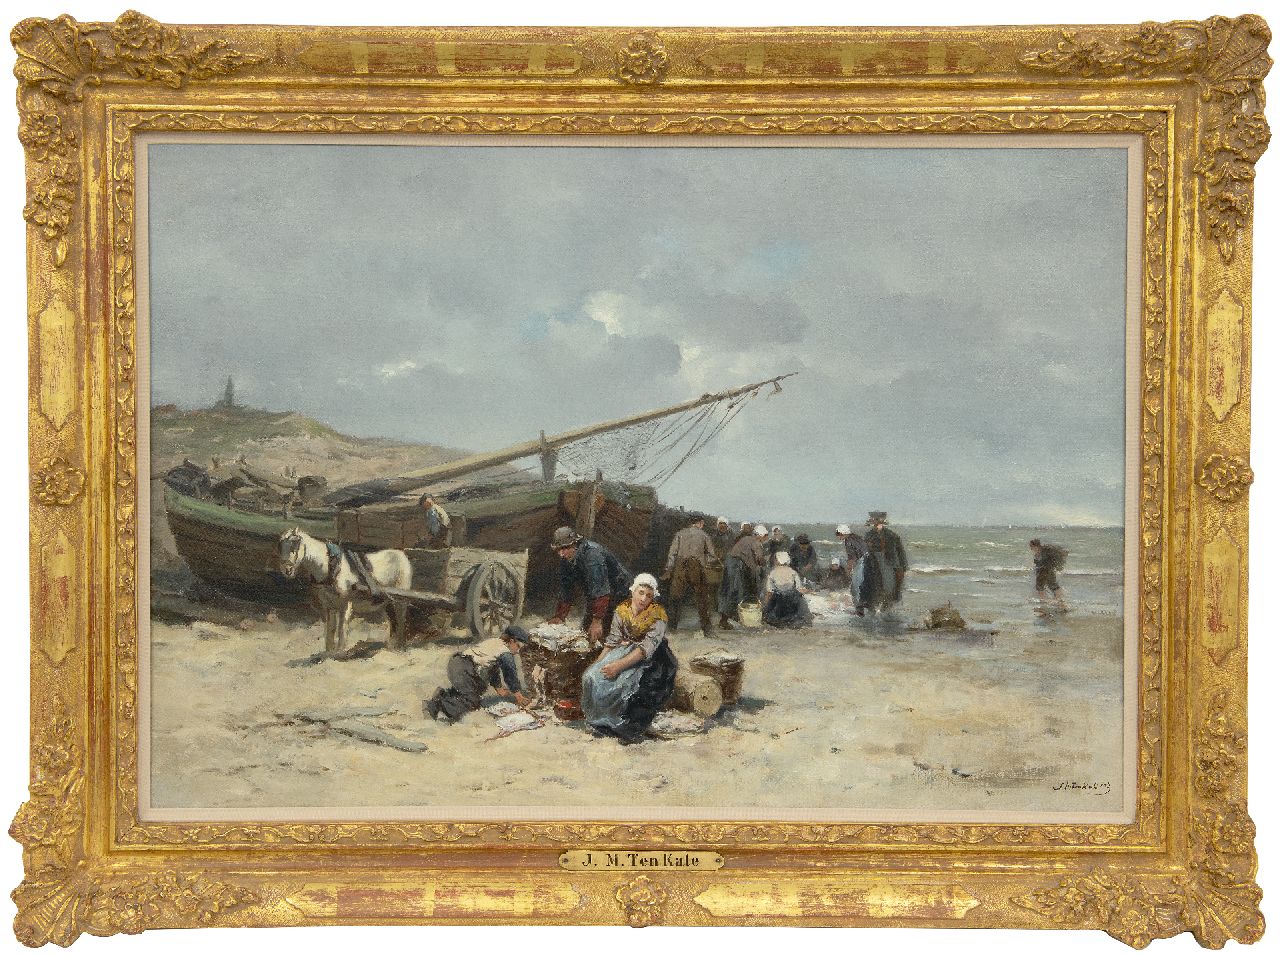 Kate J.M. ten | Johannes Marius ten Kate | Paintings offered for sale | Selling fish on the beach of Scheveningen, oil on canvas 50.5 x 73.5 cm, signed l.r.